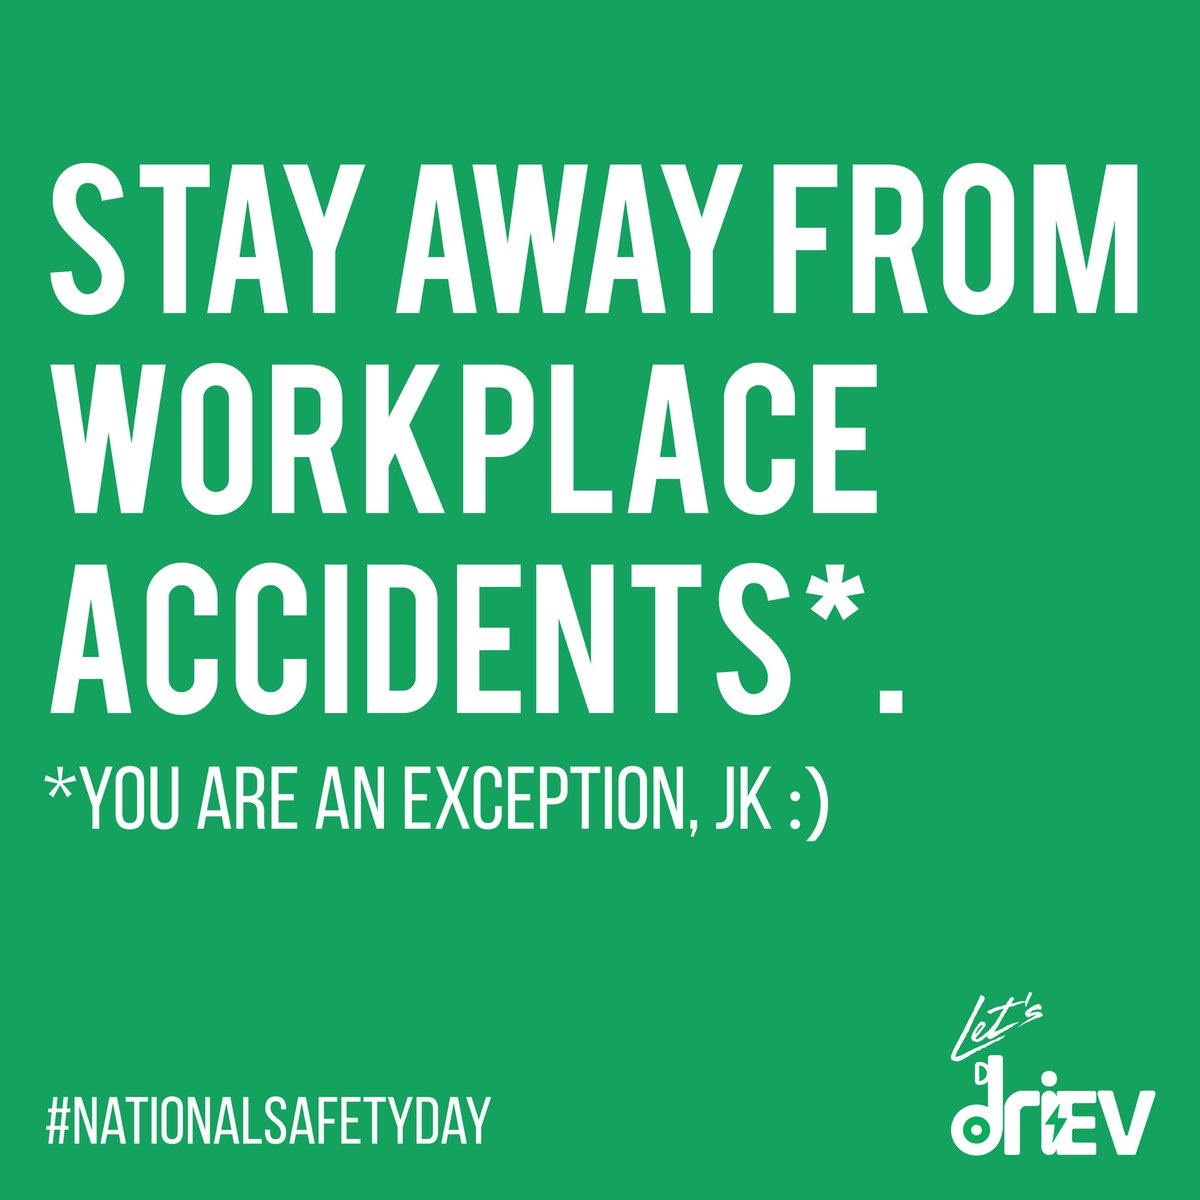 Safety isn’t just a priority; it’s a responsibility we owe to ourselves and our colleagues. On this #nationalsafetyday and every day, Let's driEV reaffirms its commitment to workplace safety. 
#workplacesafety #safetyawareness #safetyfirst #NationalSafetyDay #safety